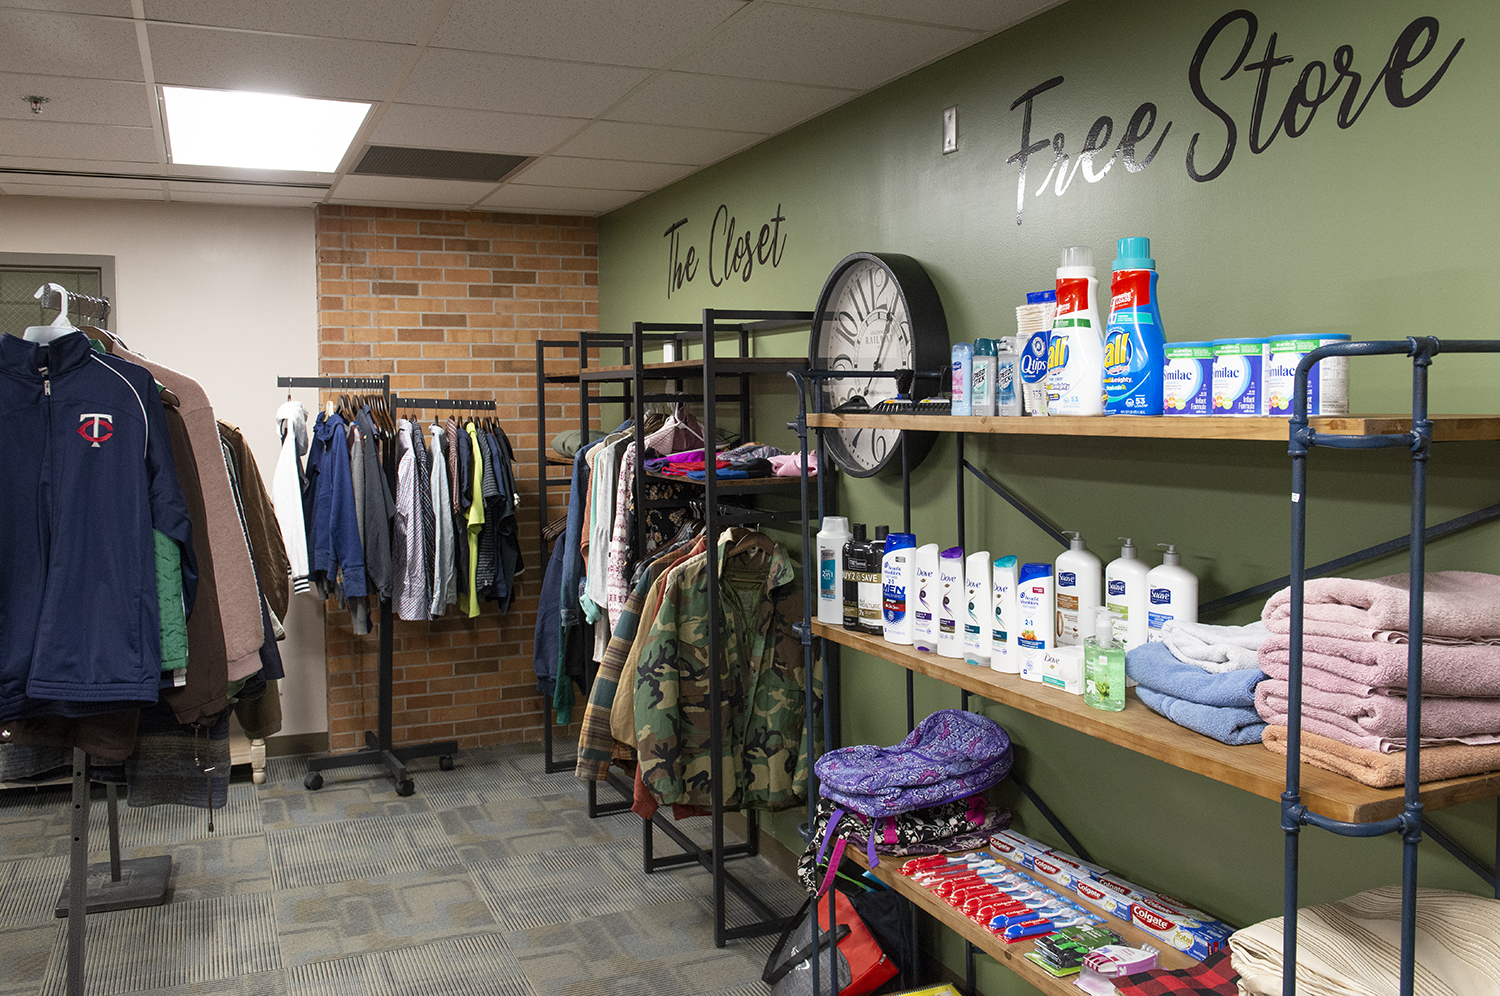 Common household items, jackets and school supplies available in the NTC Closet Free Store